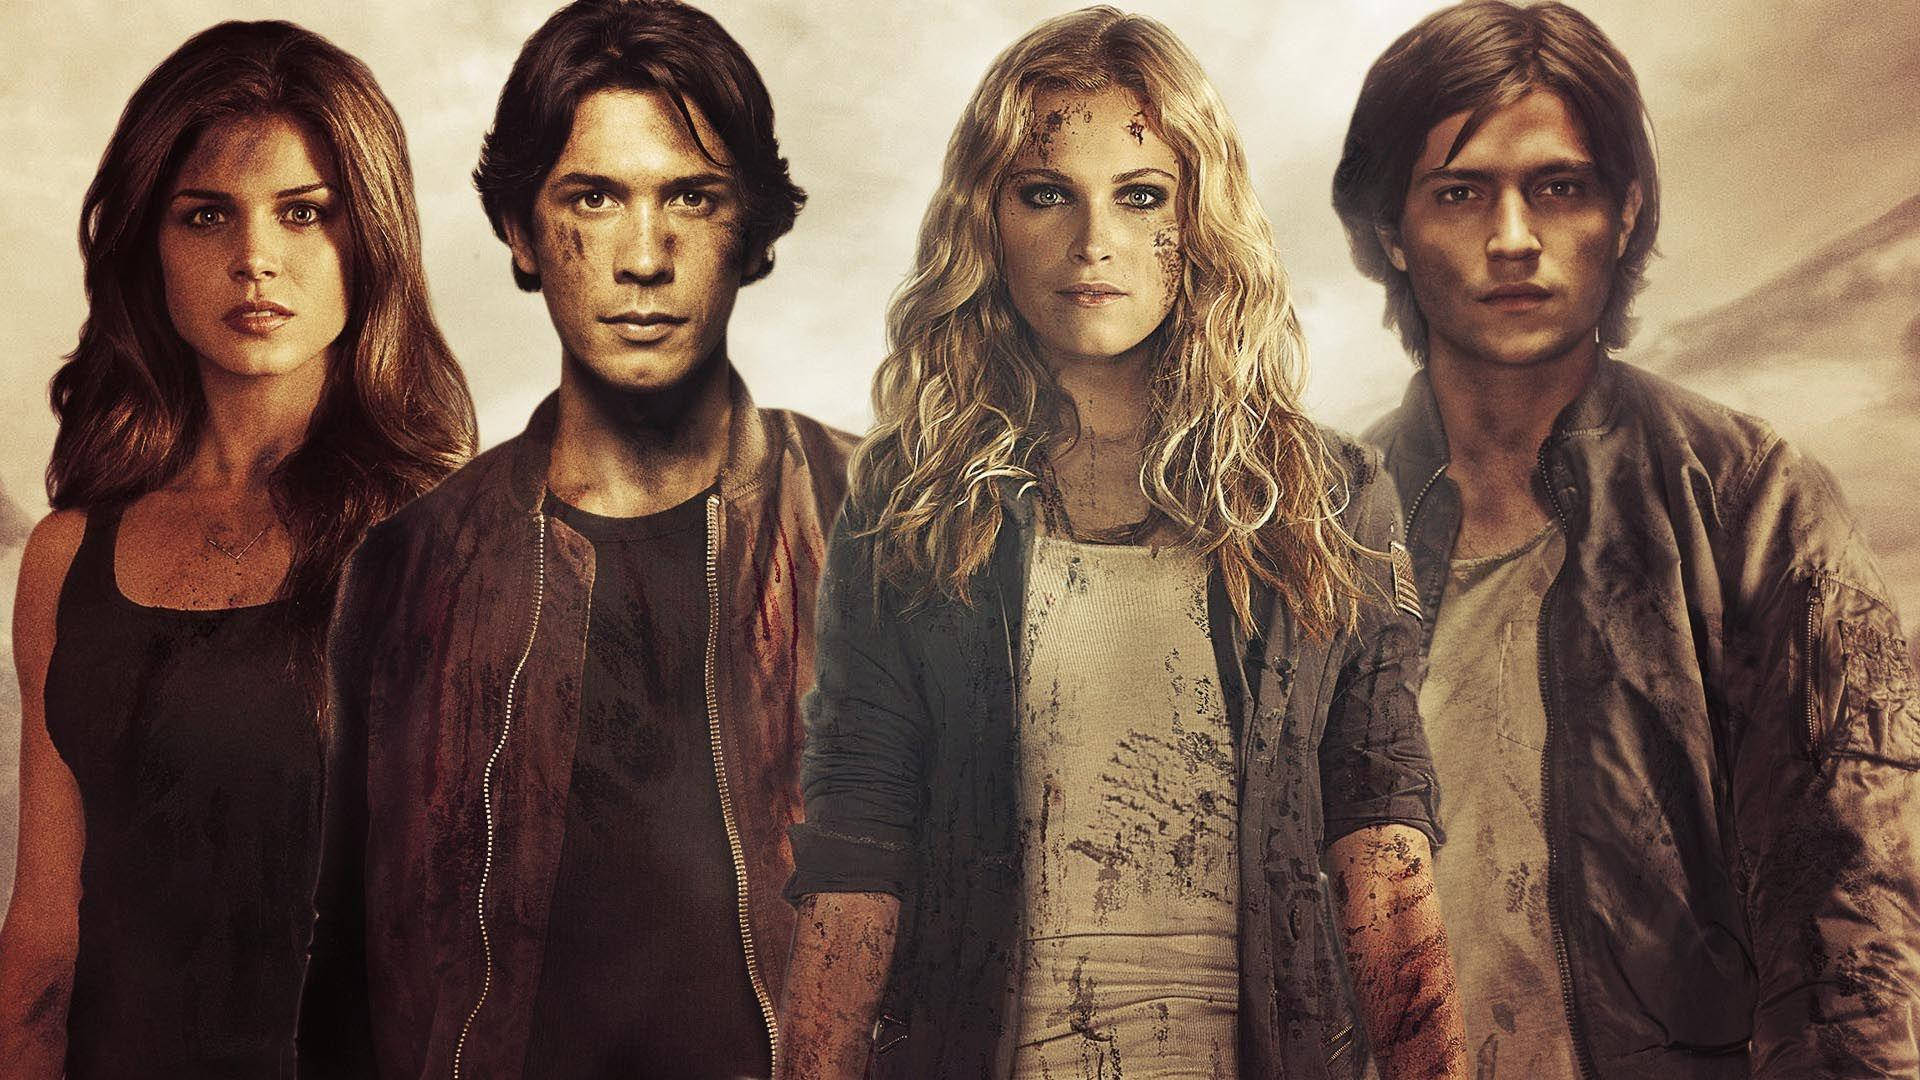 The Resilient Characters Of The 100 - Madi Griffin Amidst The Cast Background